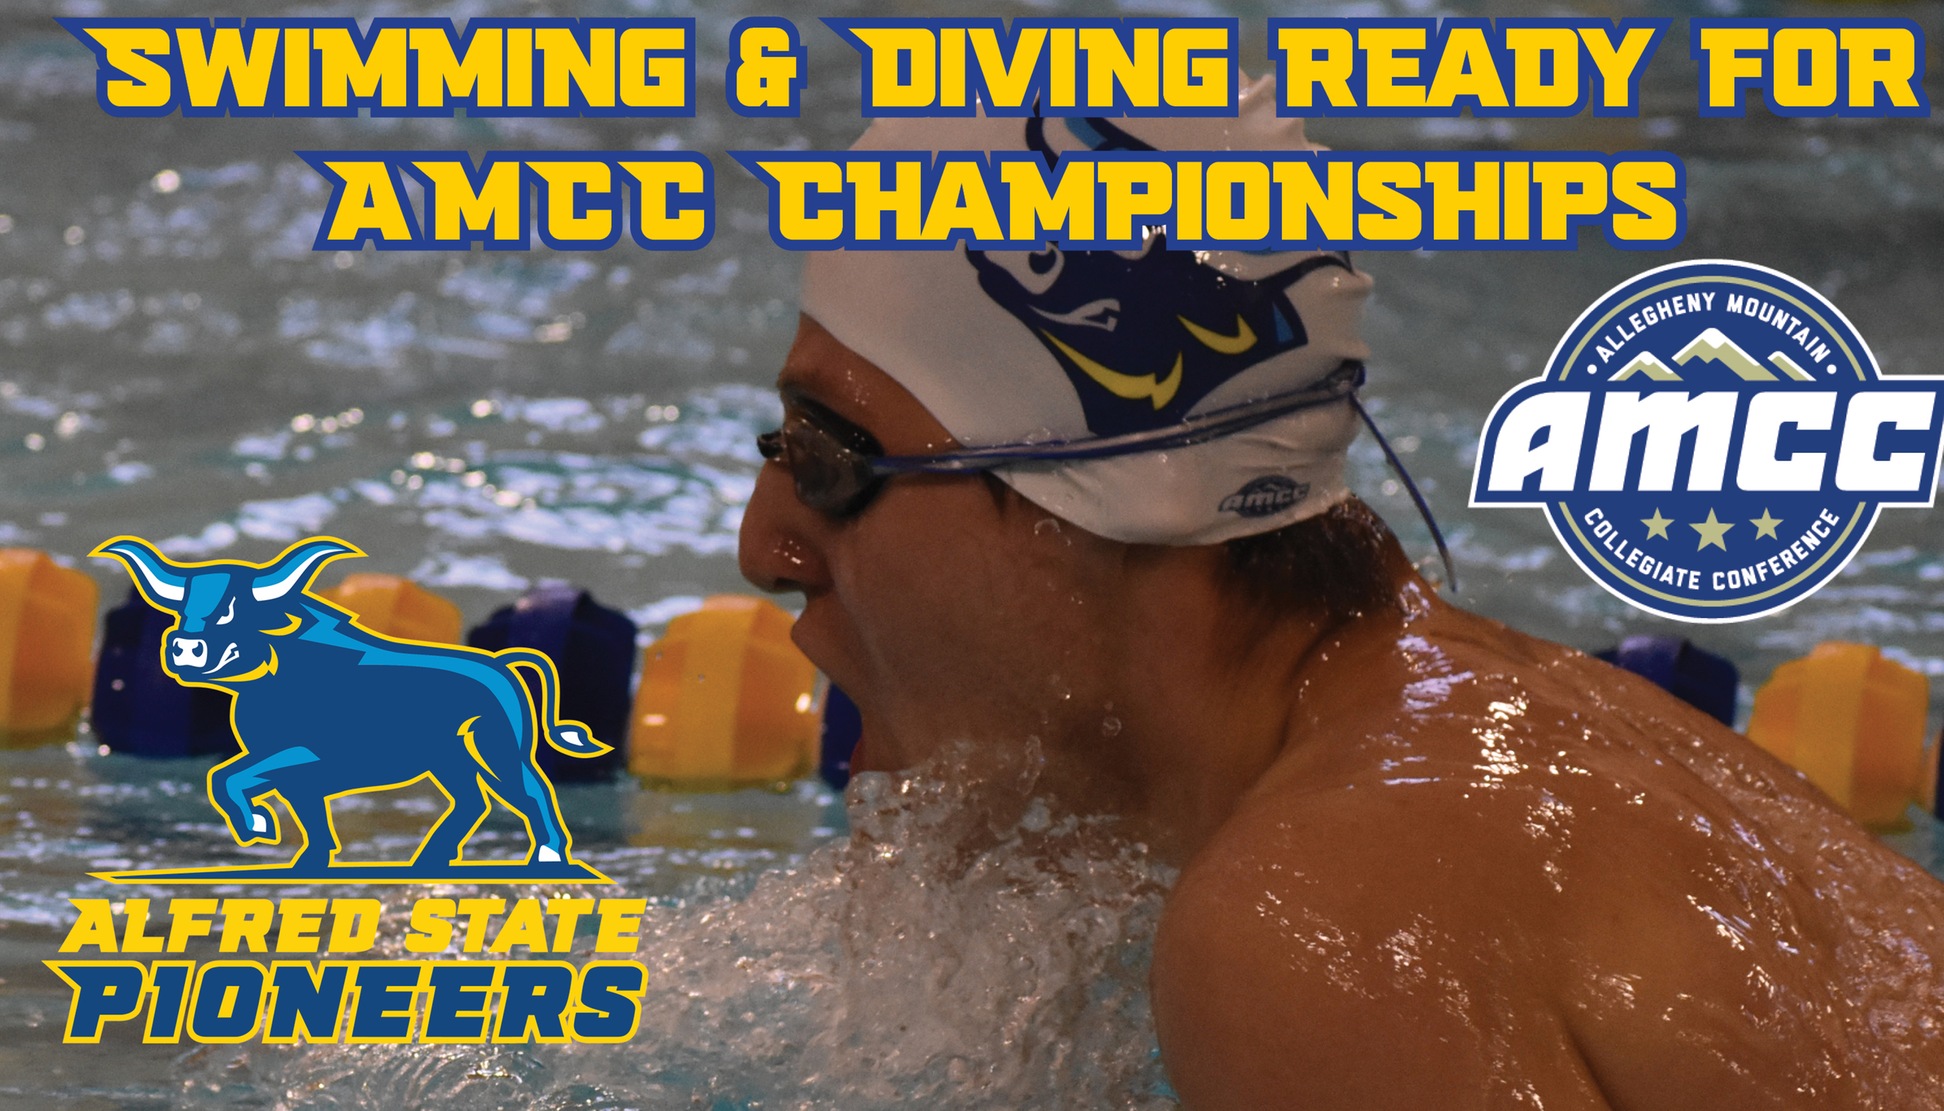 Pioneers ready for AMCC Swimming & Diving Championships